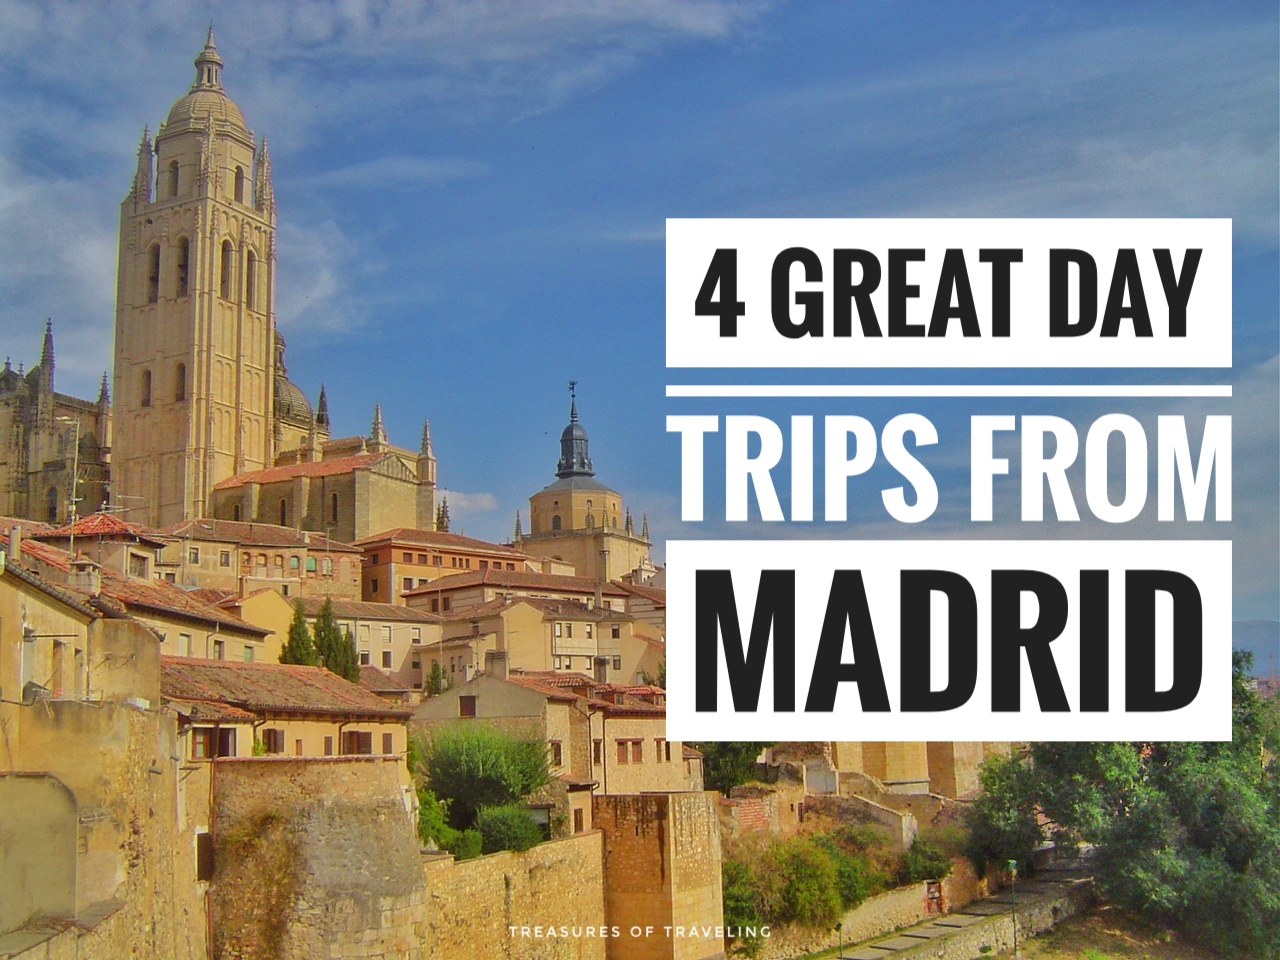 Madrid, the capital city of Spain has many things to see, but you might want to escape the city for a couple days and explore a few other medieval cities around the central part of Spain. Check out these four great day trips from Madrid!